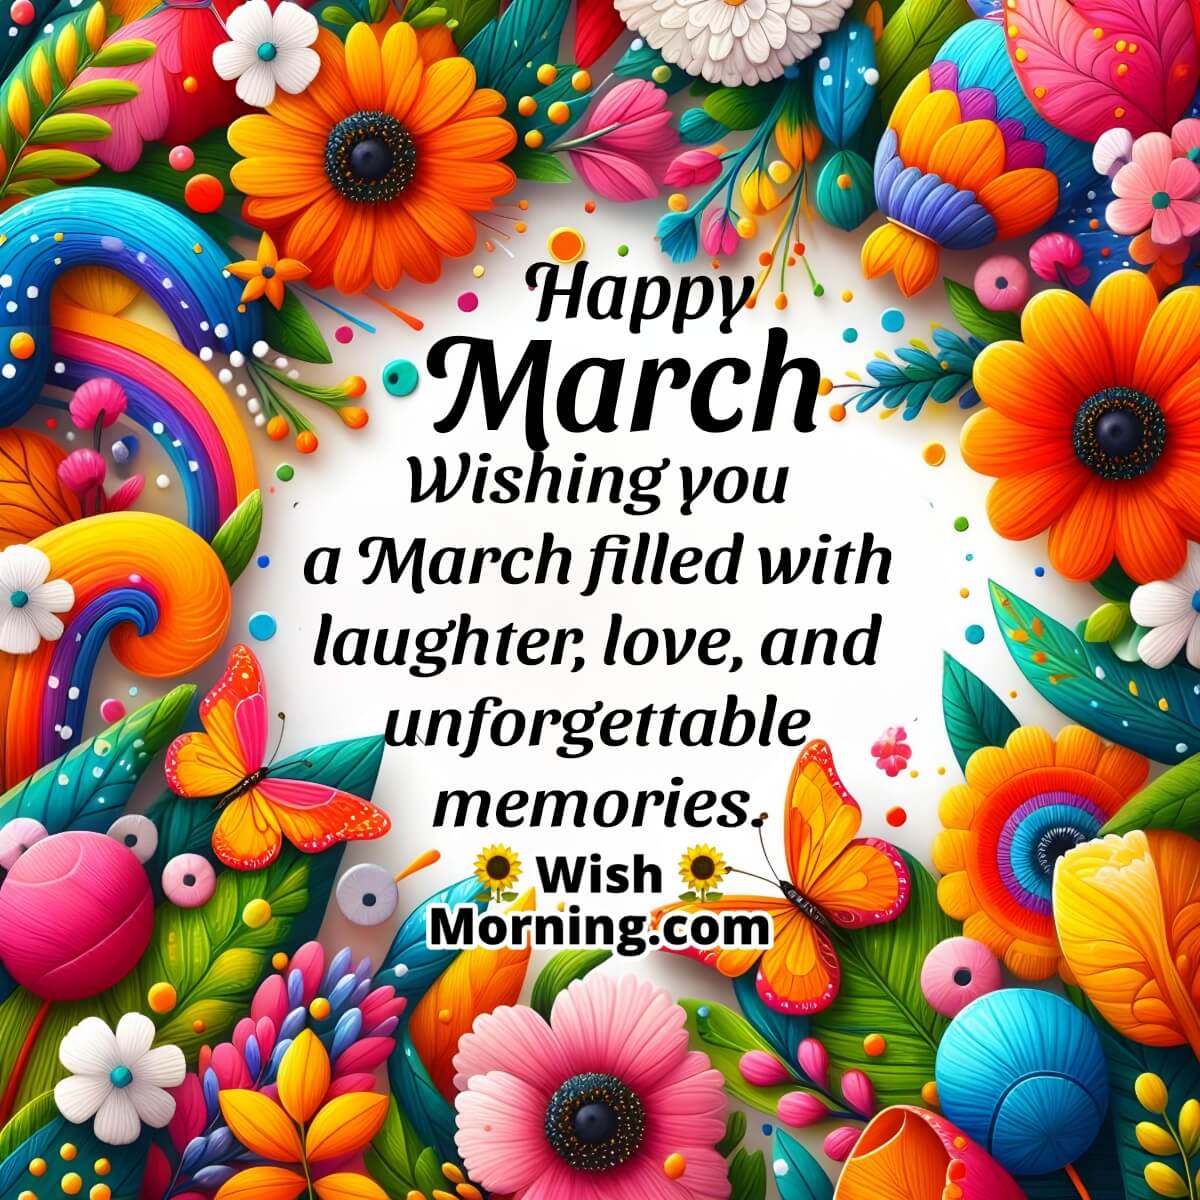 Happy March Wish Greetings